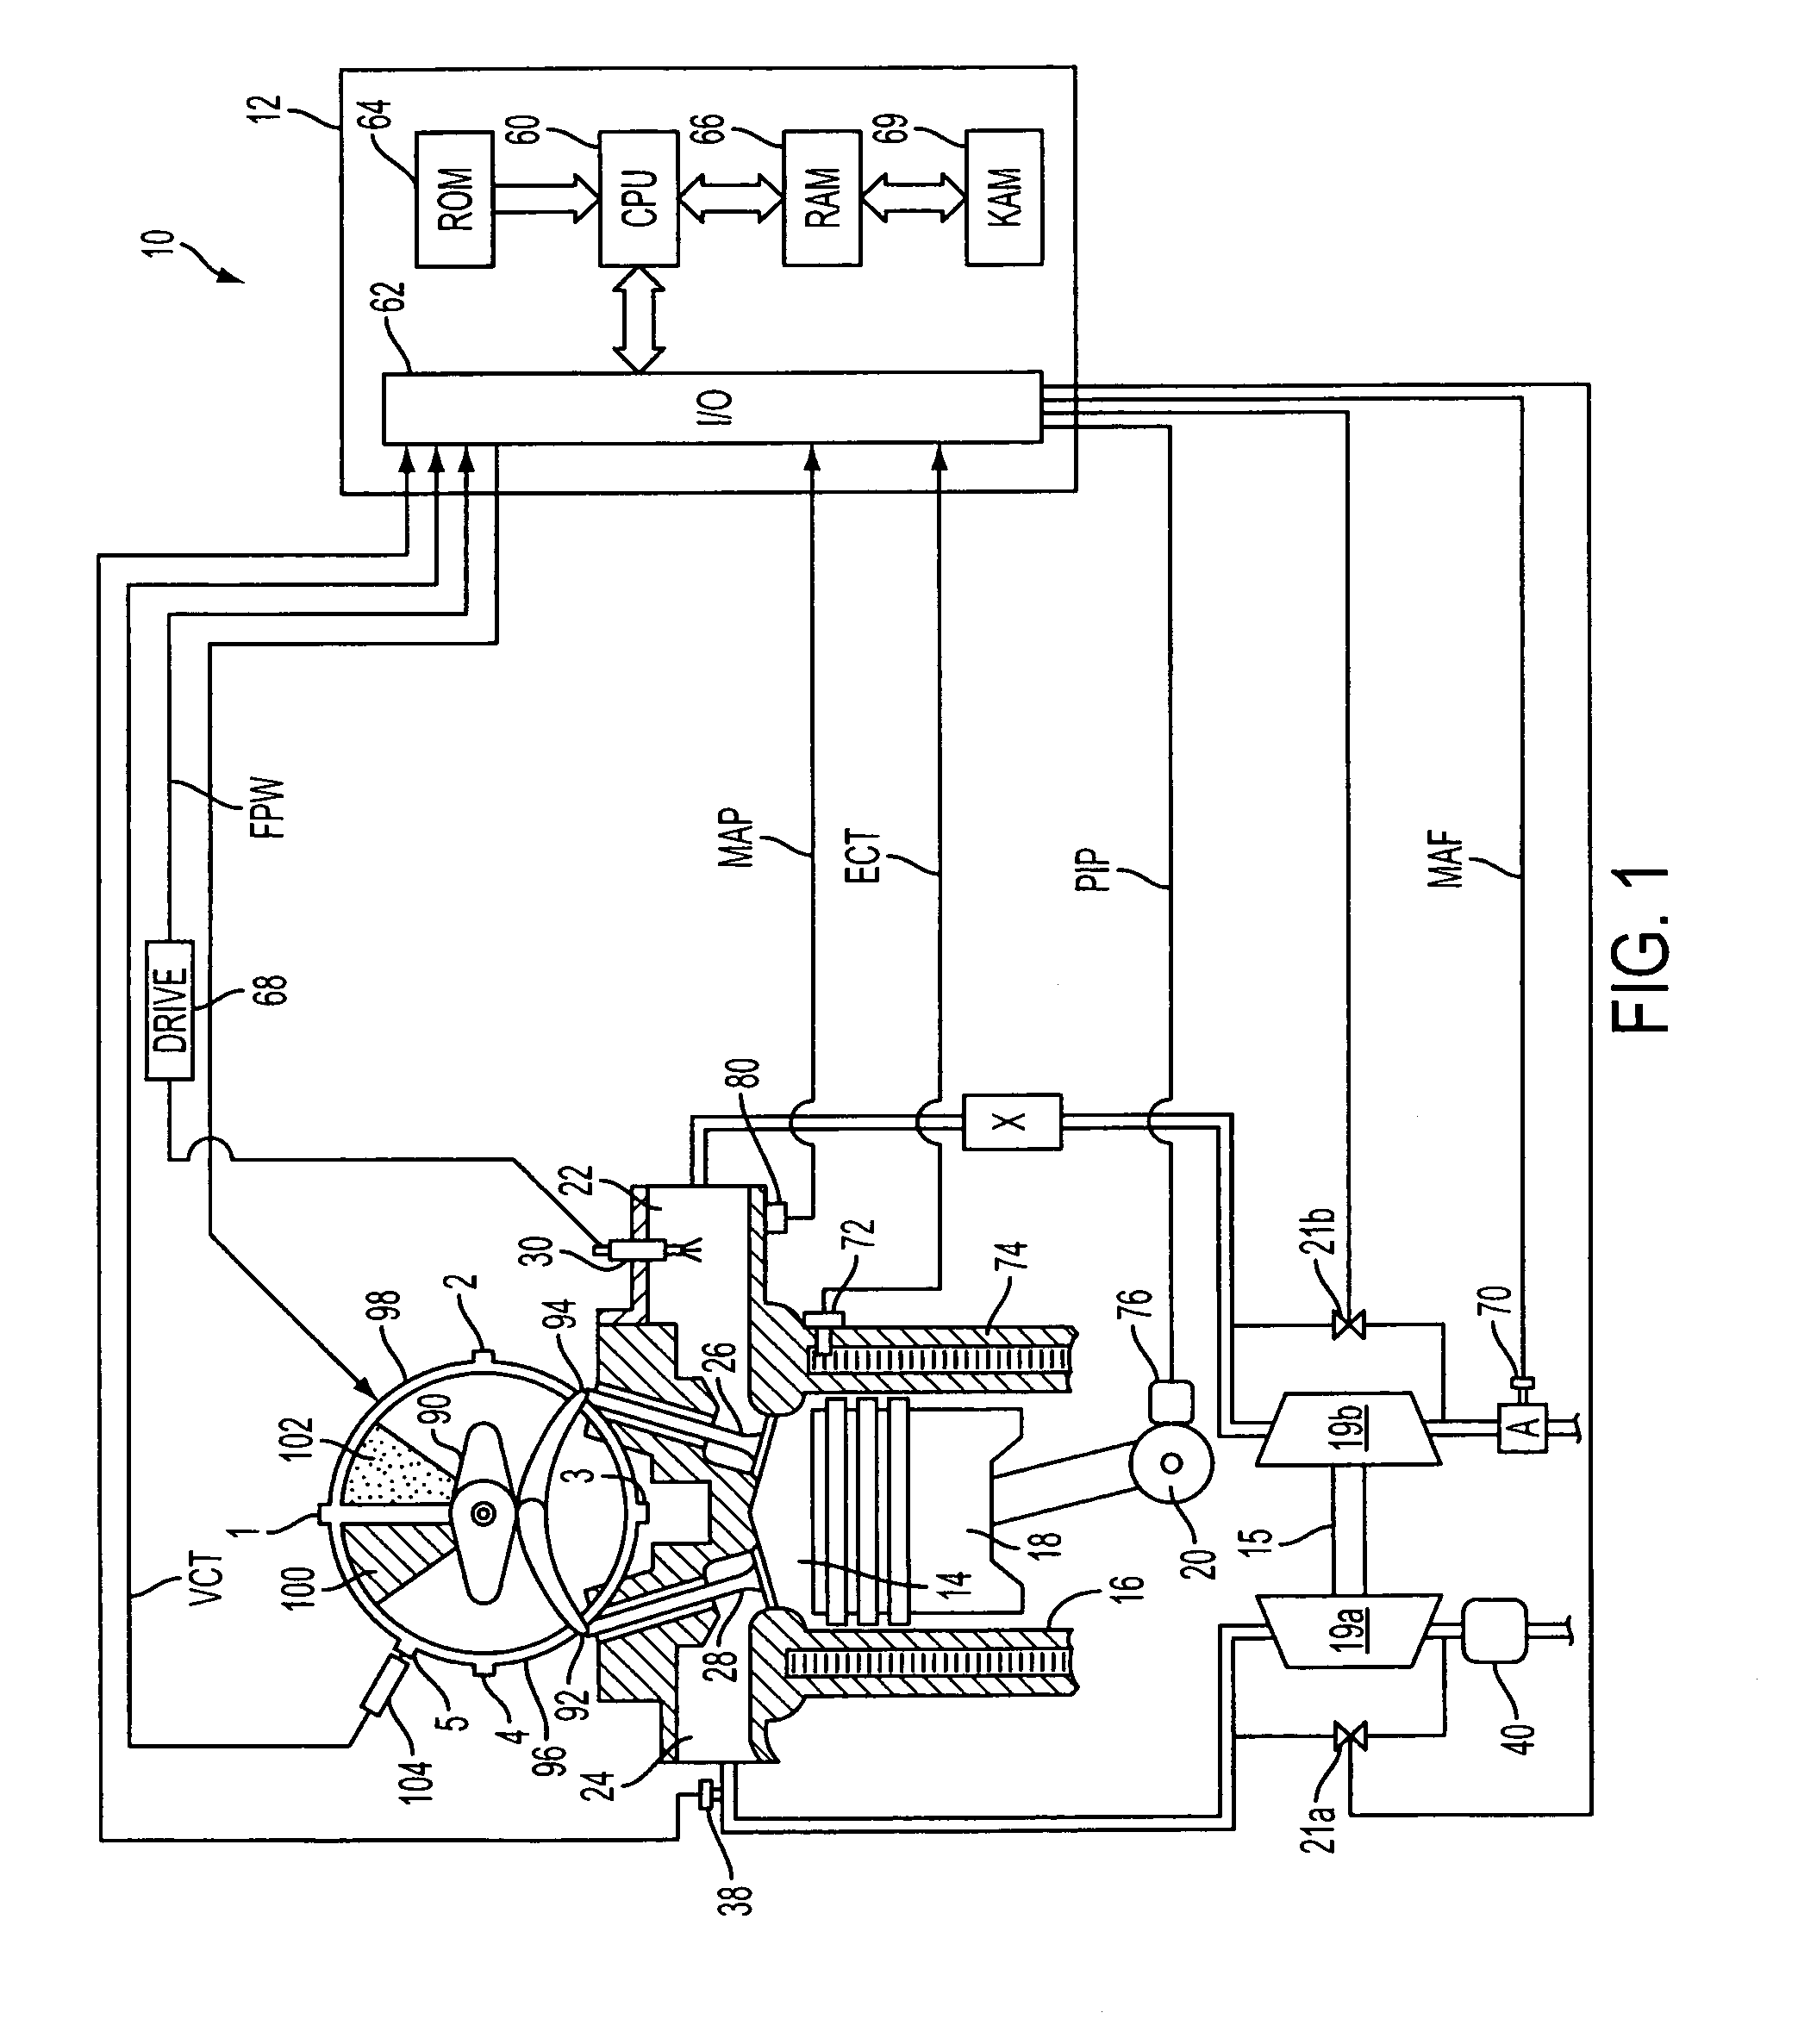 Variable intake valve and exhaust valve timing strategy for improving performance in a hydrogen fueled engine